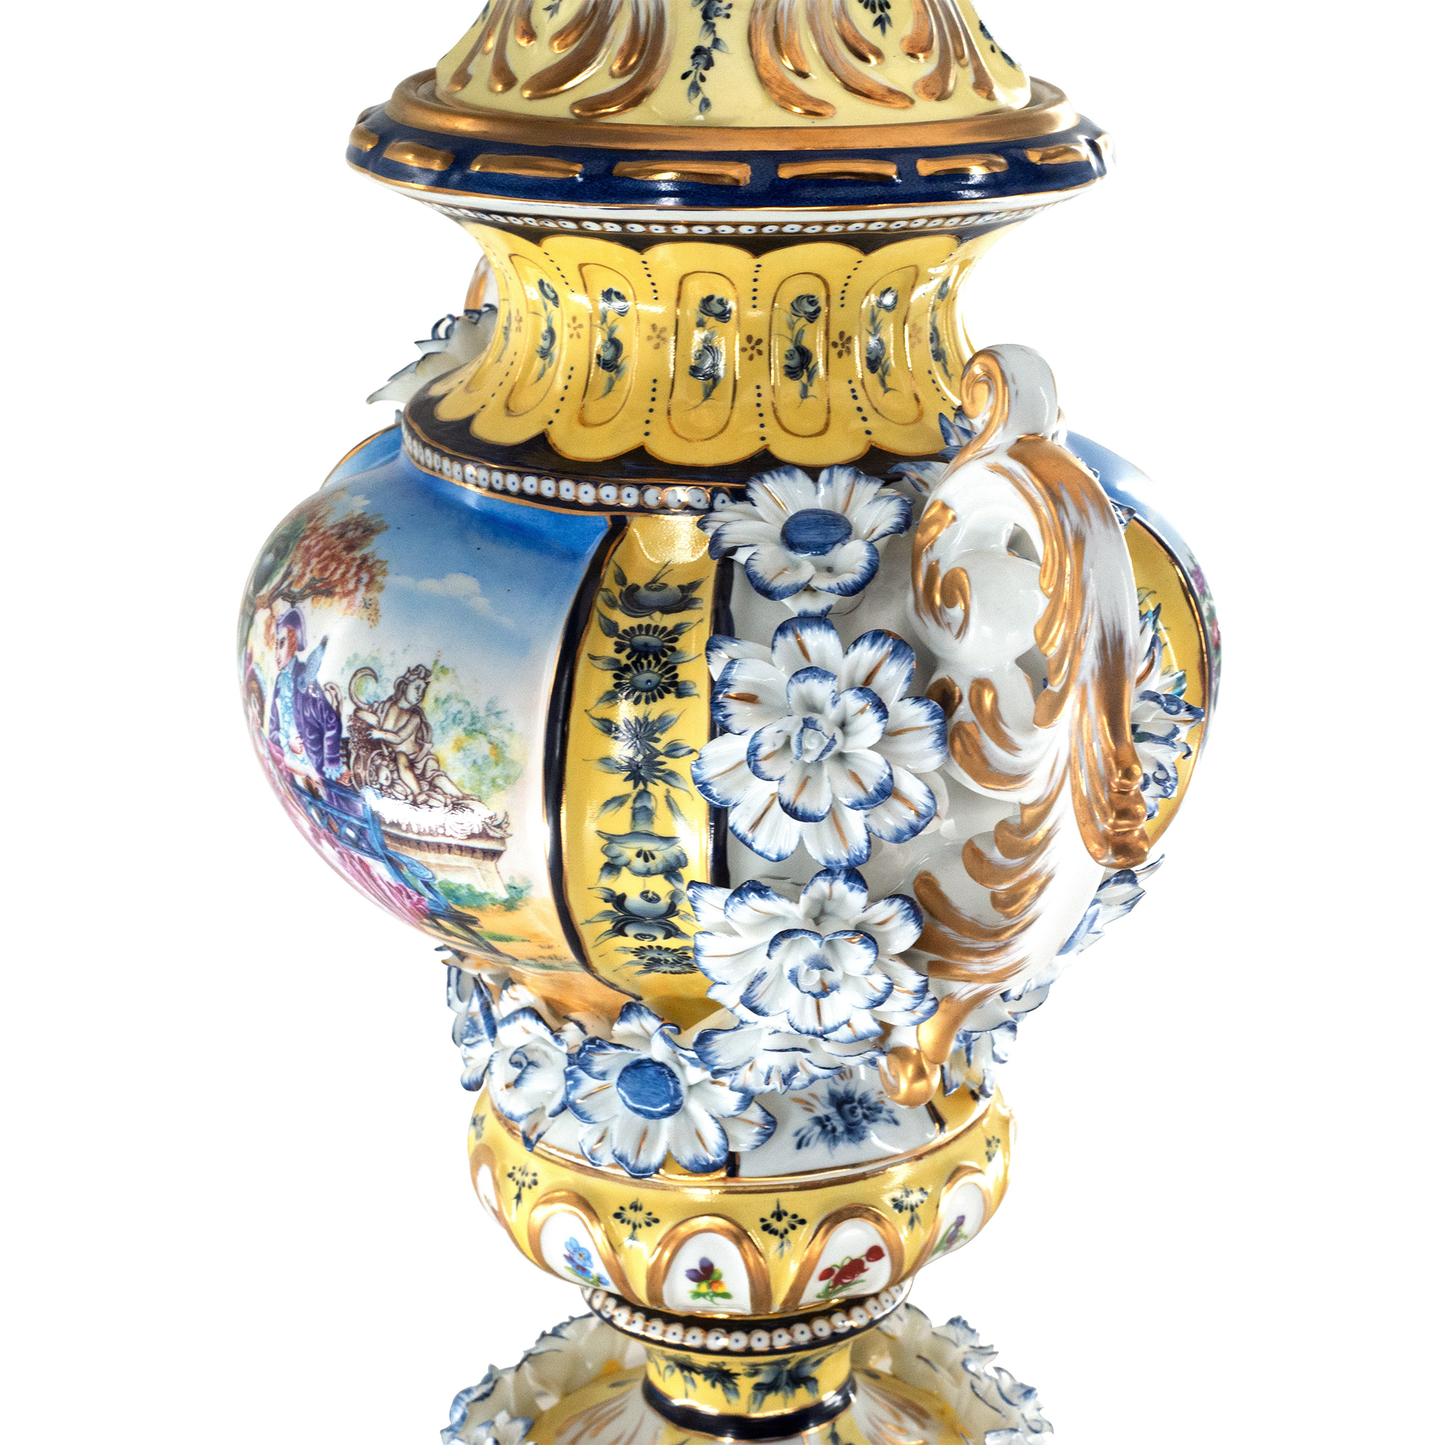 Rococo Hand-painted Three Dimensional Porcelain Flower Urn